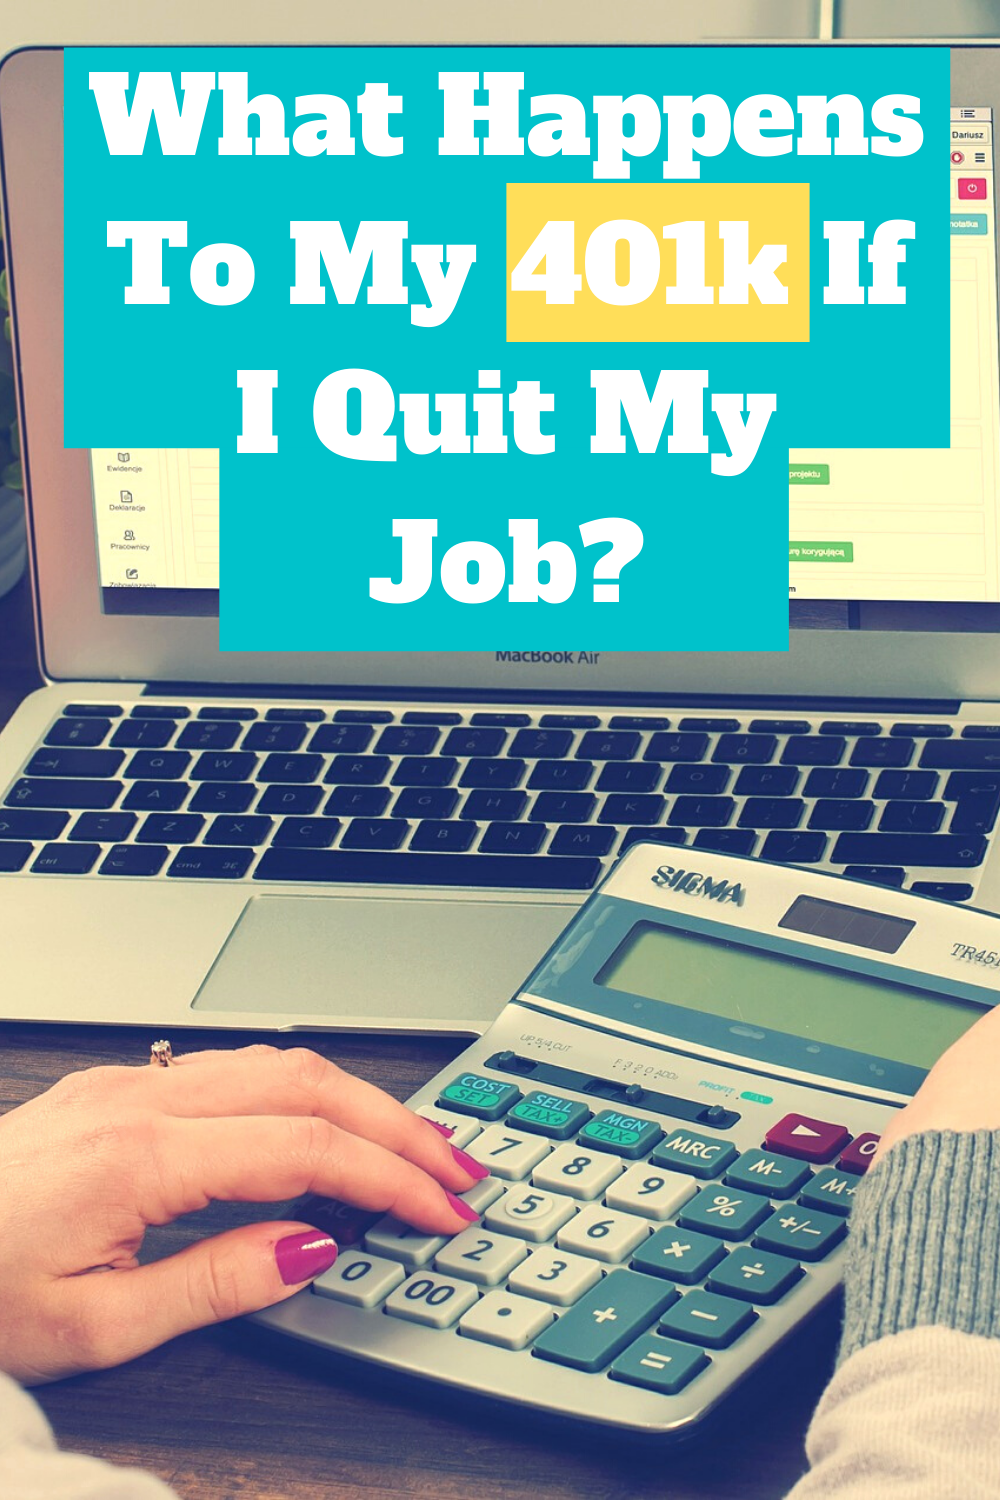 What Happens To My 401k If I Quit My Job?